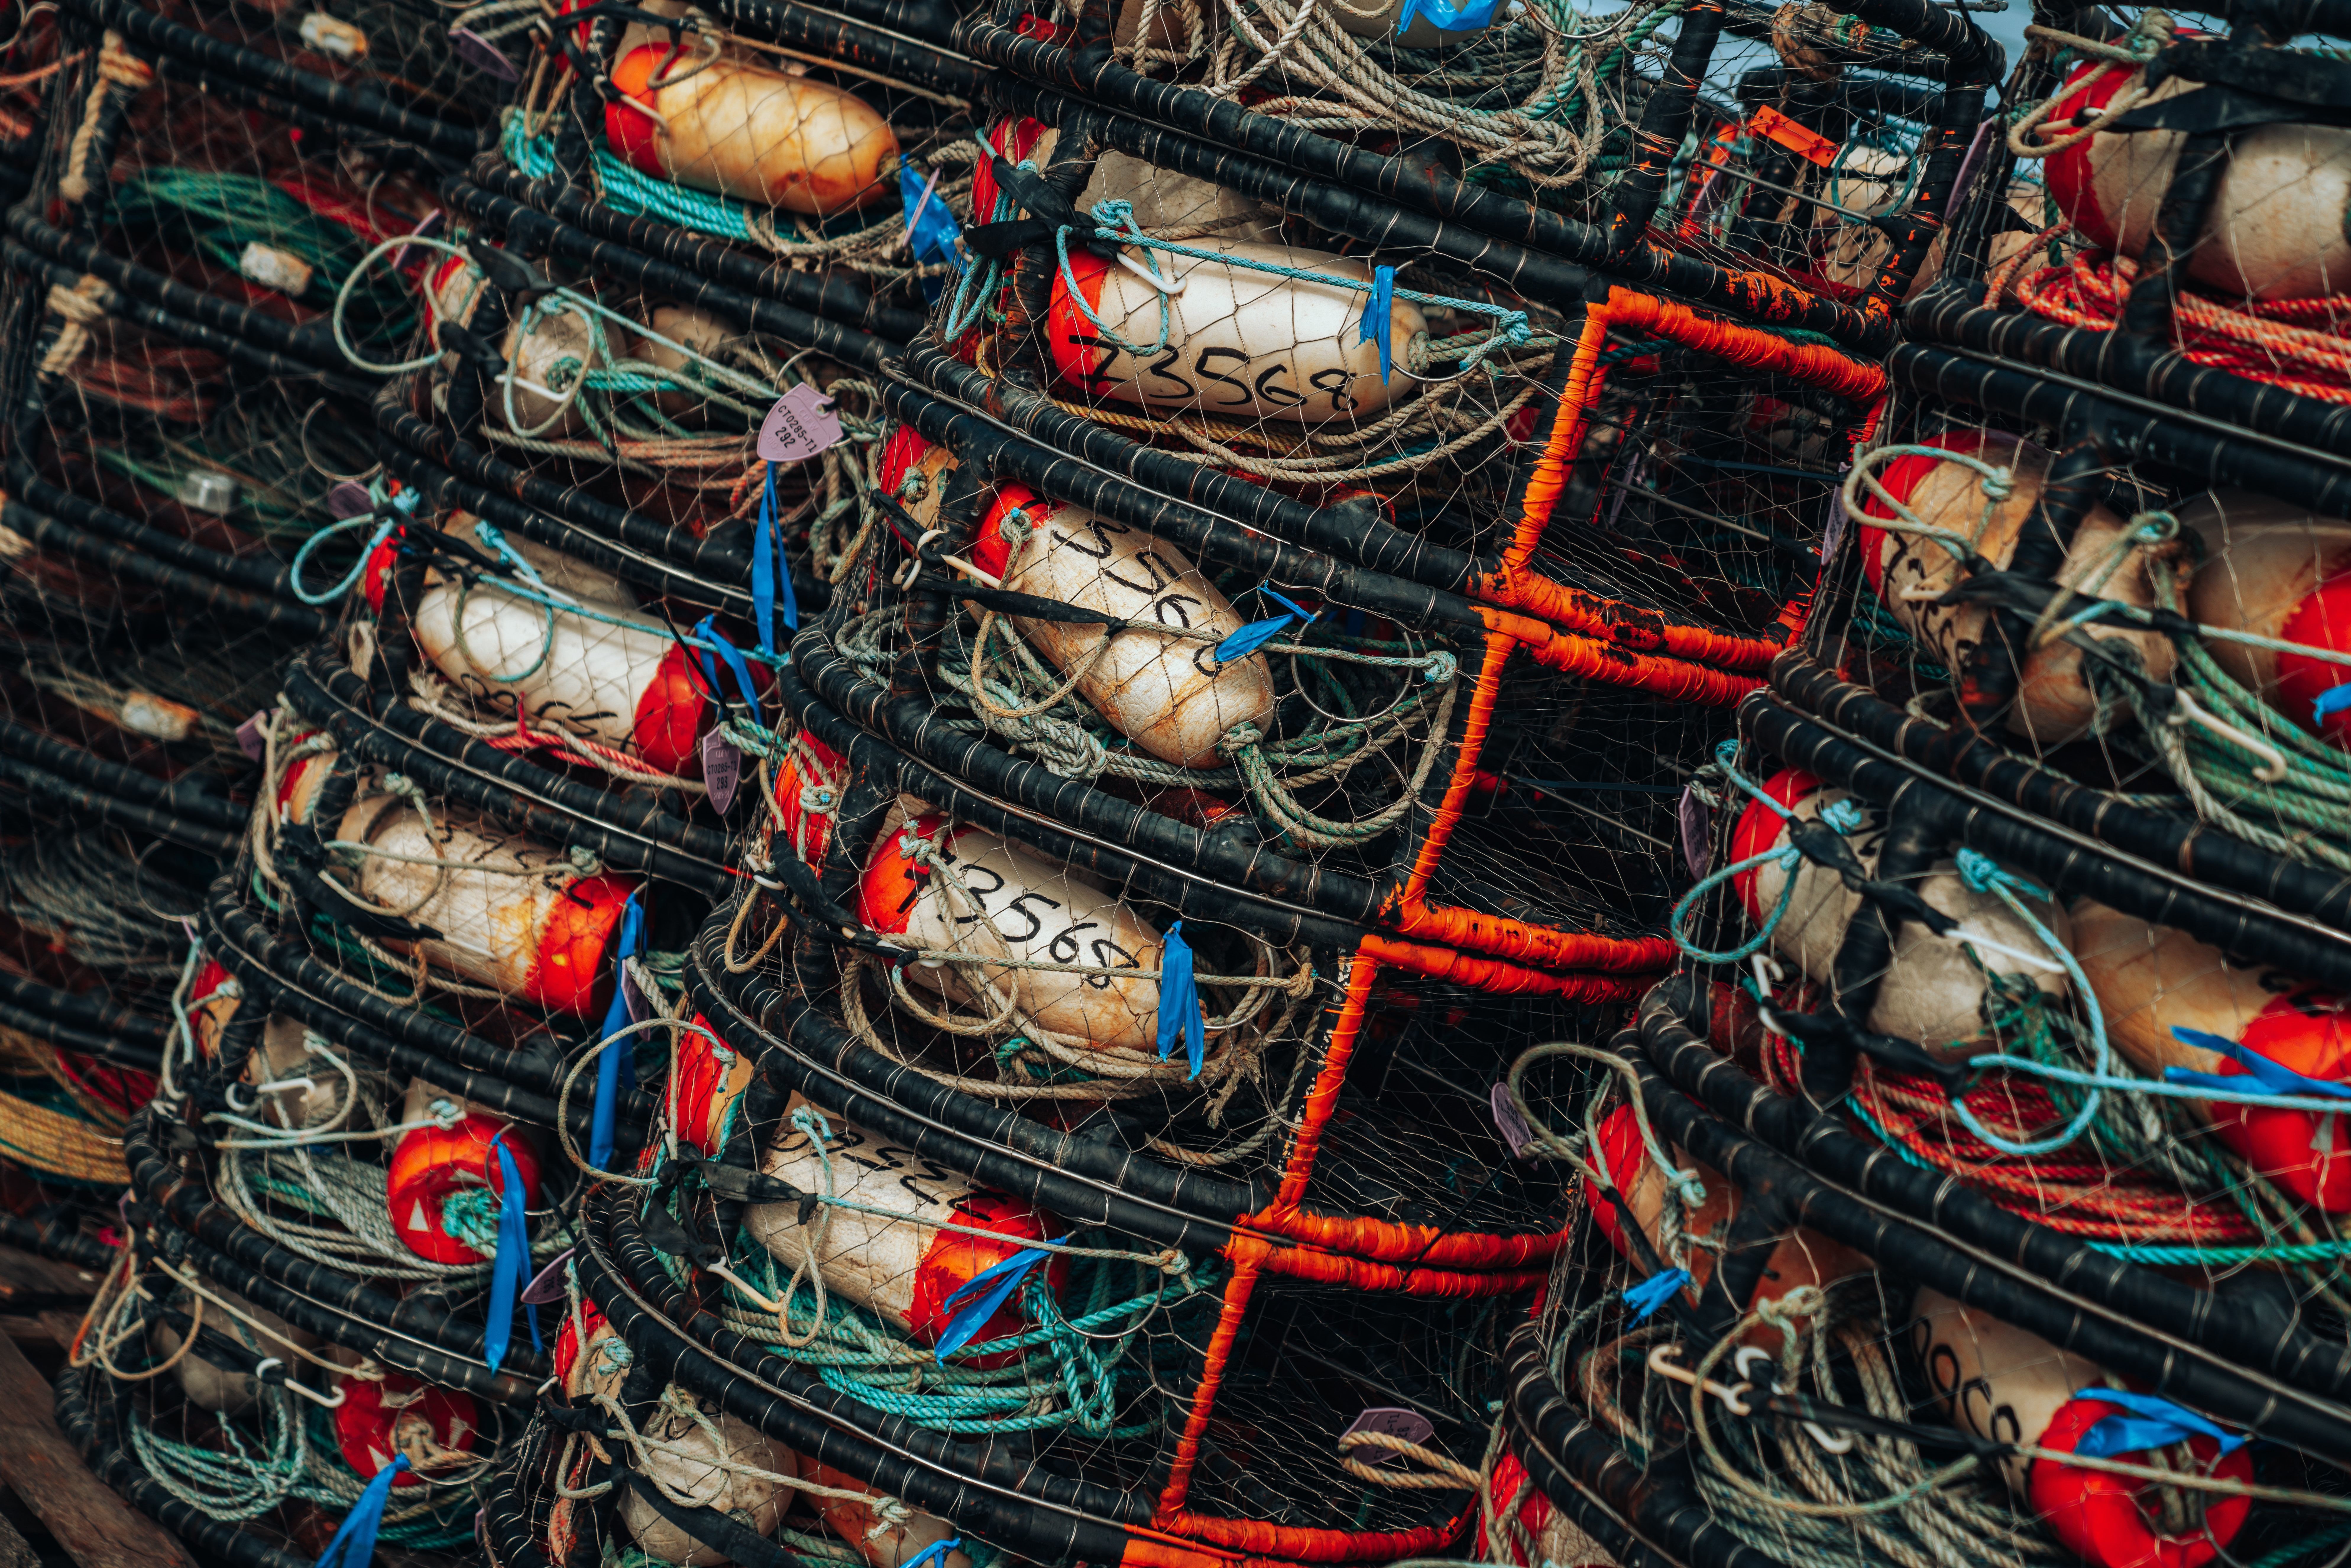 Stacks of worn crab traps await fishing season in Bodega Bay, California: Experts estimate that an additional 16 million tonnes could be available without overfishing our oceans.